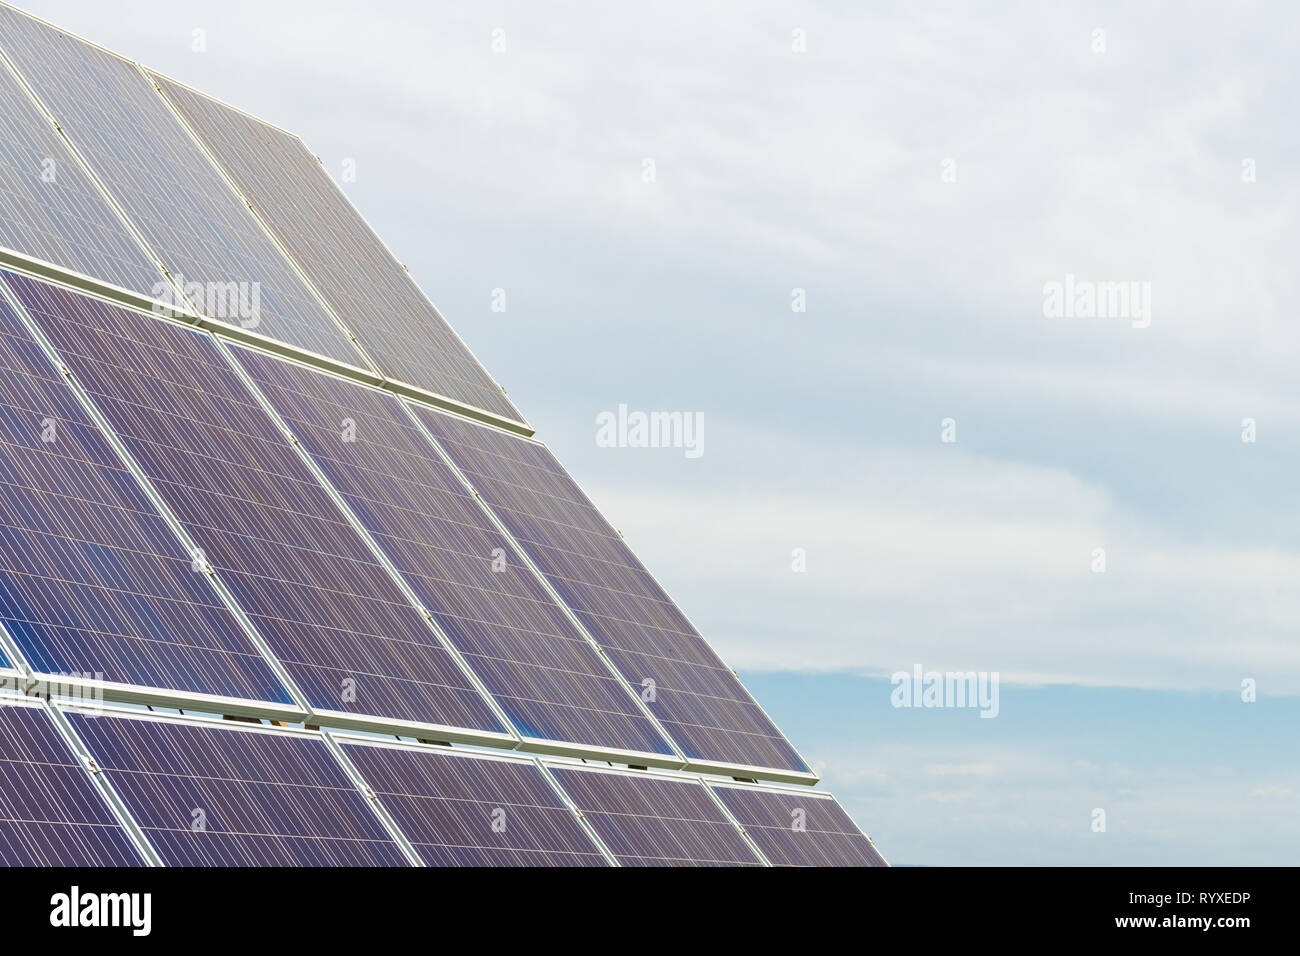 Solar cell photovoltaic panels at energy production plant with blue cloudy sky in the background. Solar renewable energy concept Stock Photo